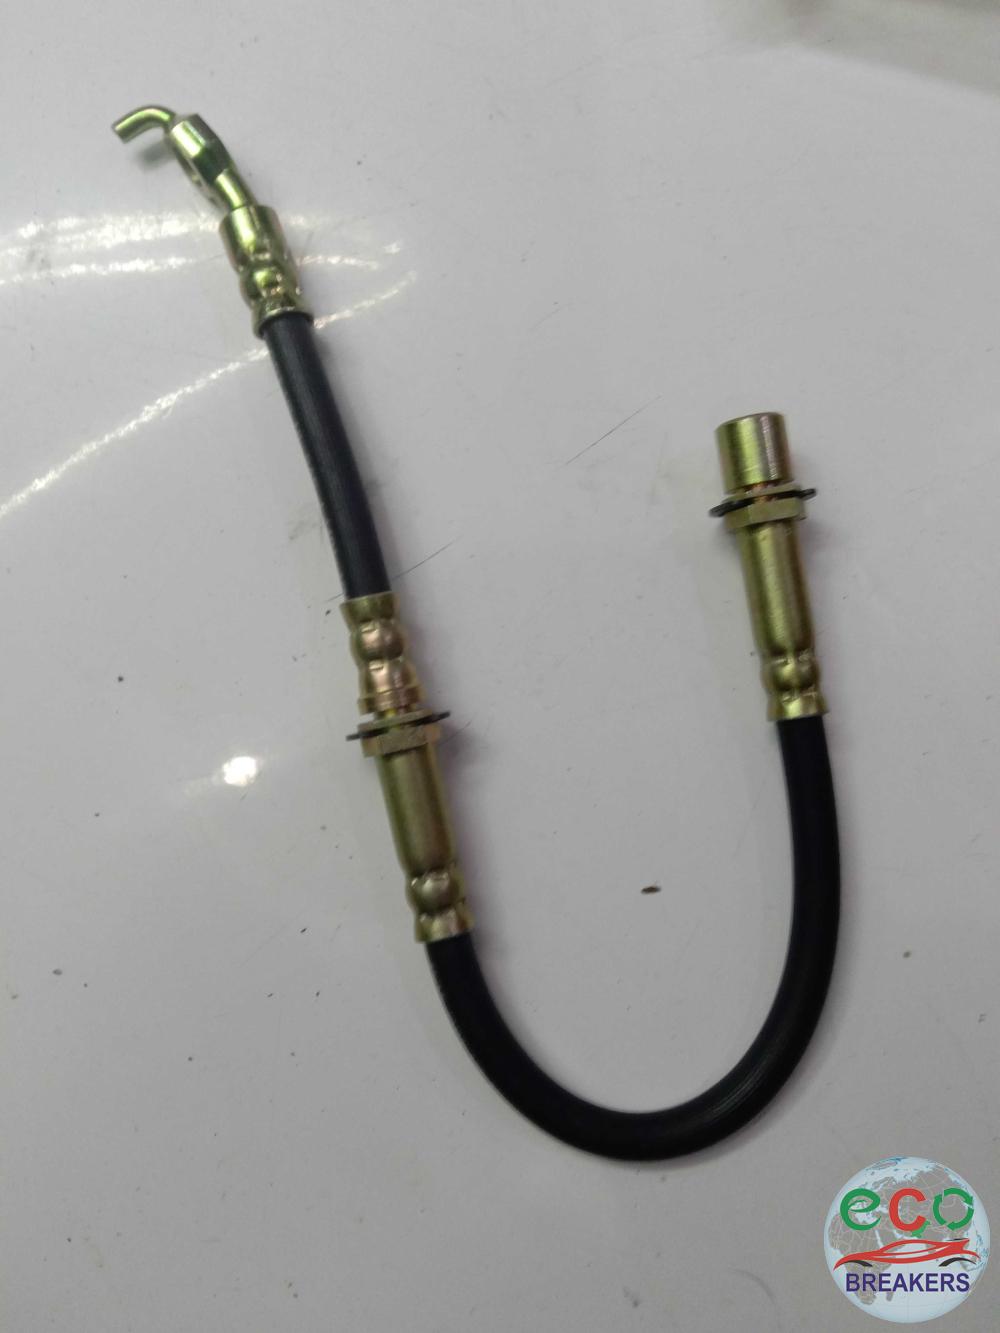 Toyota Hiace 280 SWB RCH12 Brake Hose RIGHT DRIVER OFF SIDE FRONT OSF 2.4 i 2438 cc Petrol 2RZE 5 Speed Manual Van